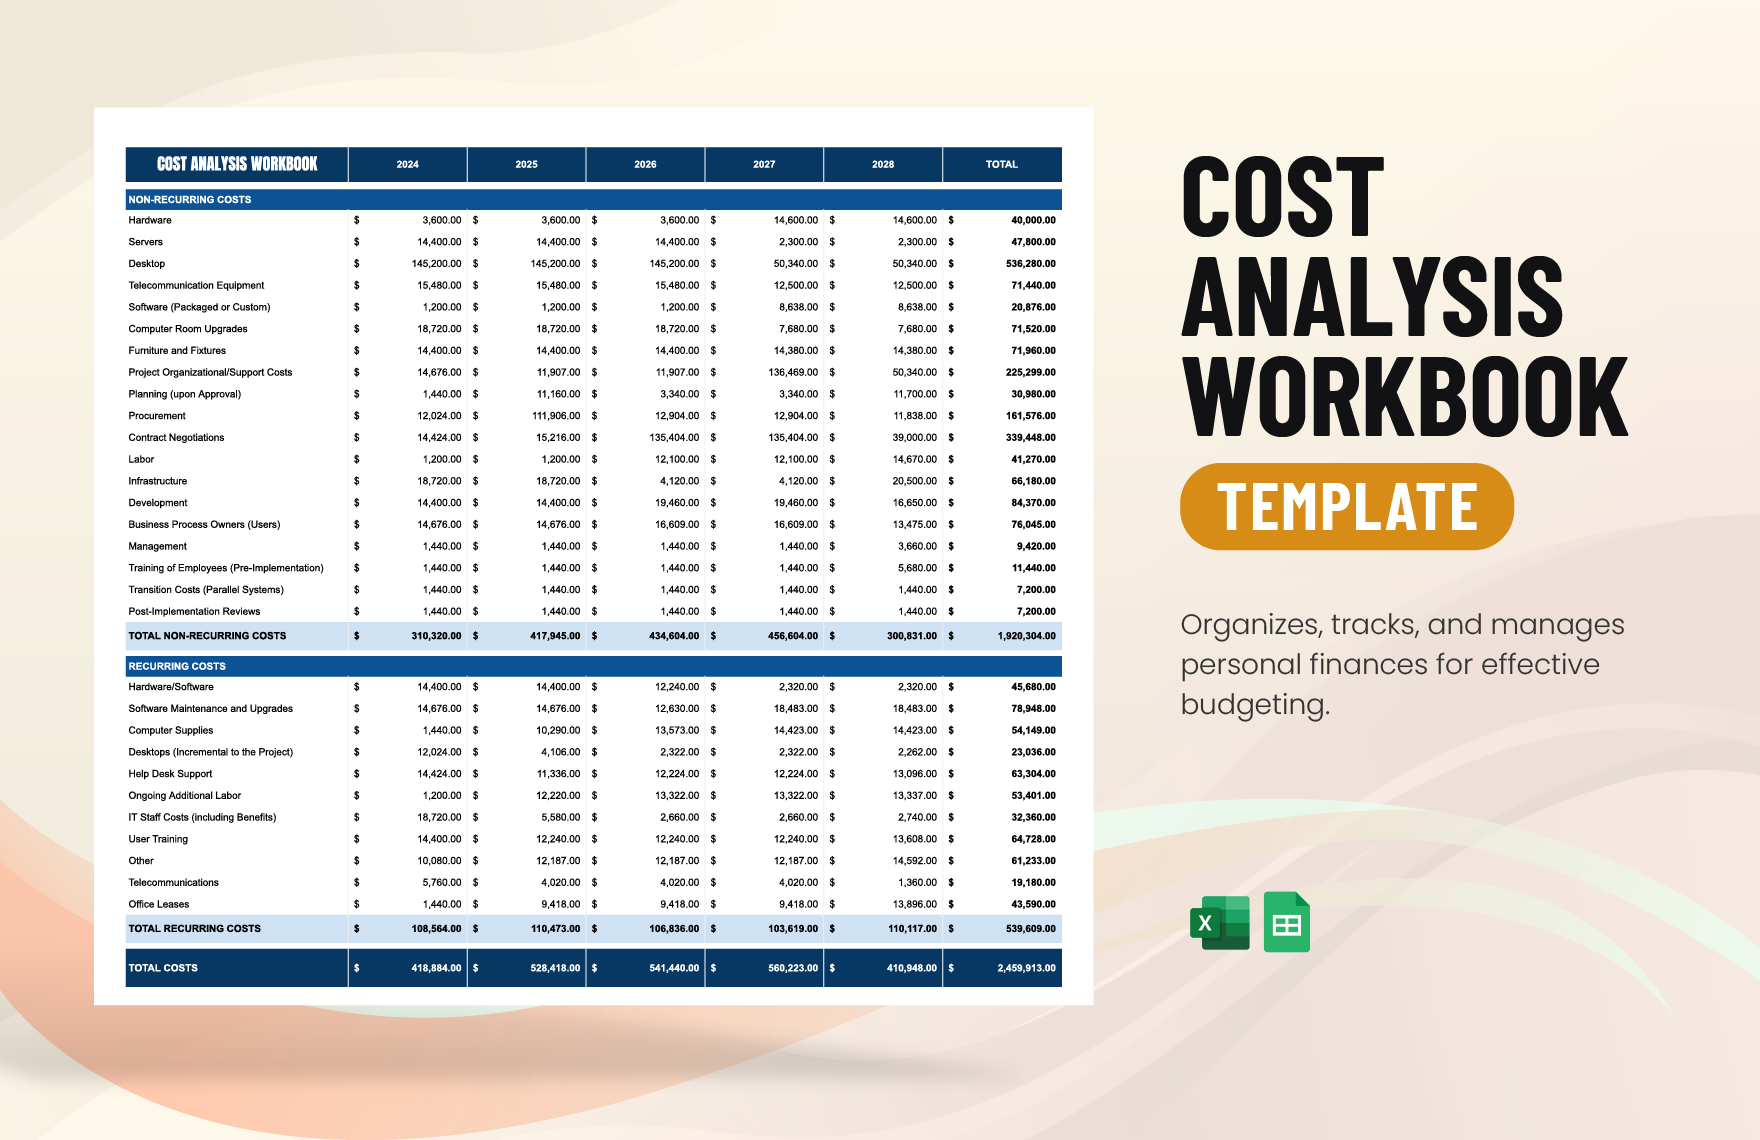 Cost Analysis Workbook Template in Excel, Google Sheets